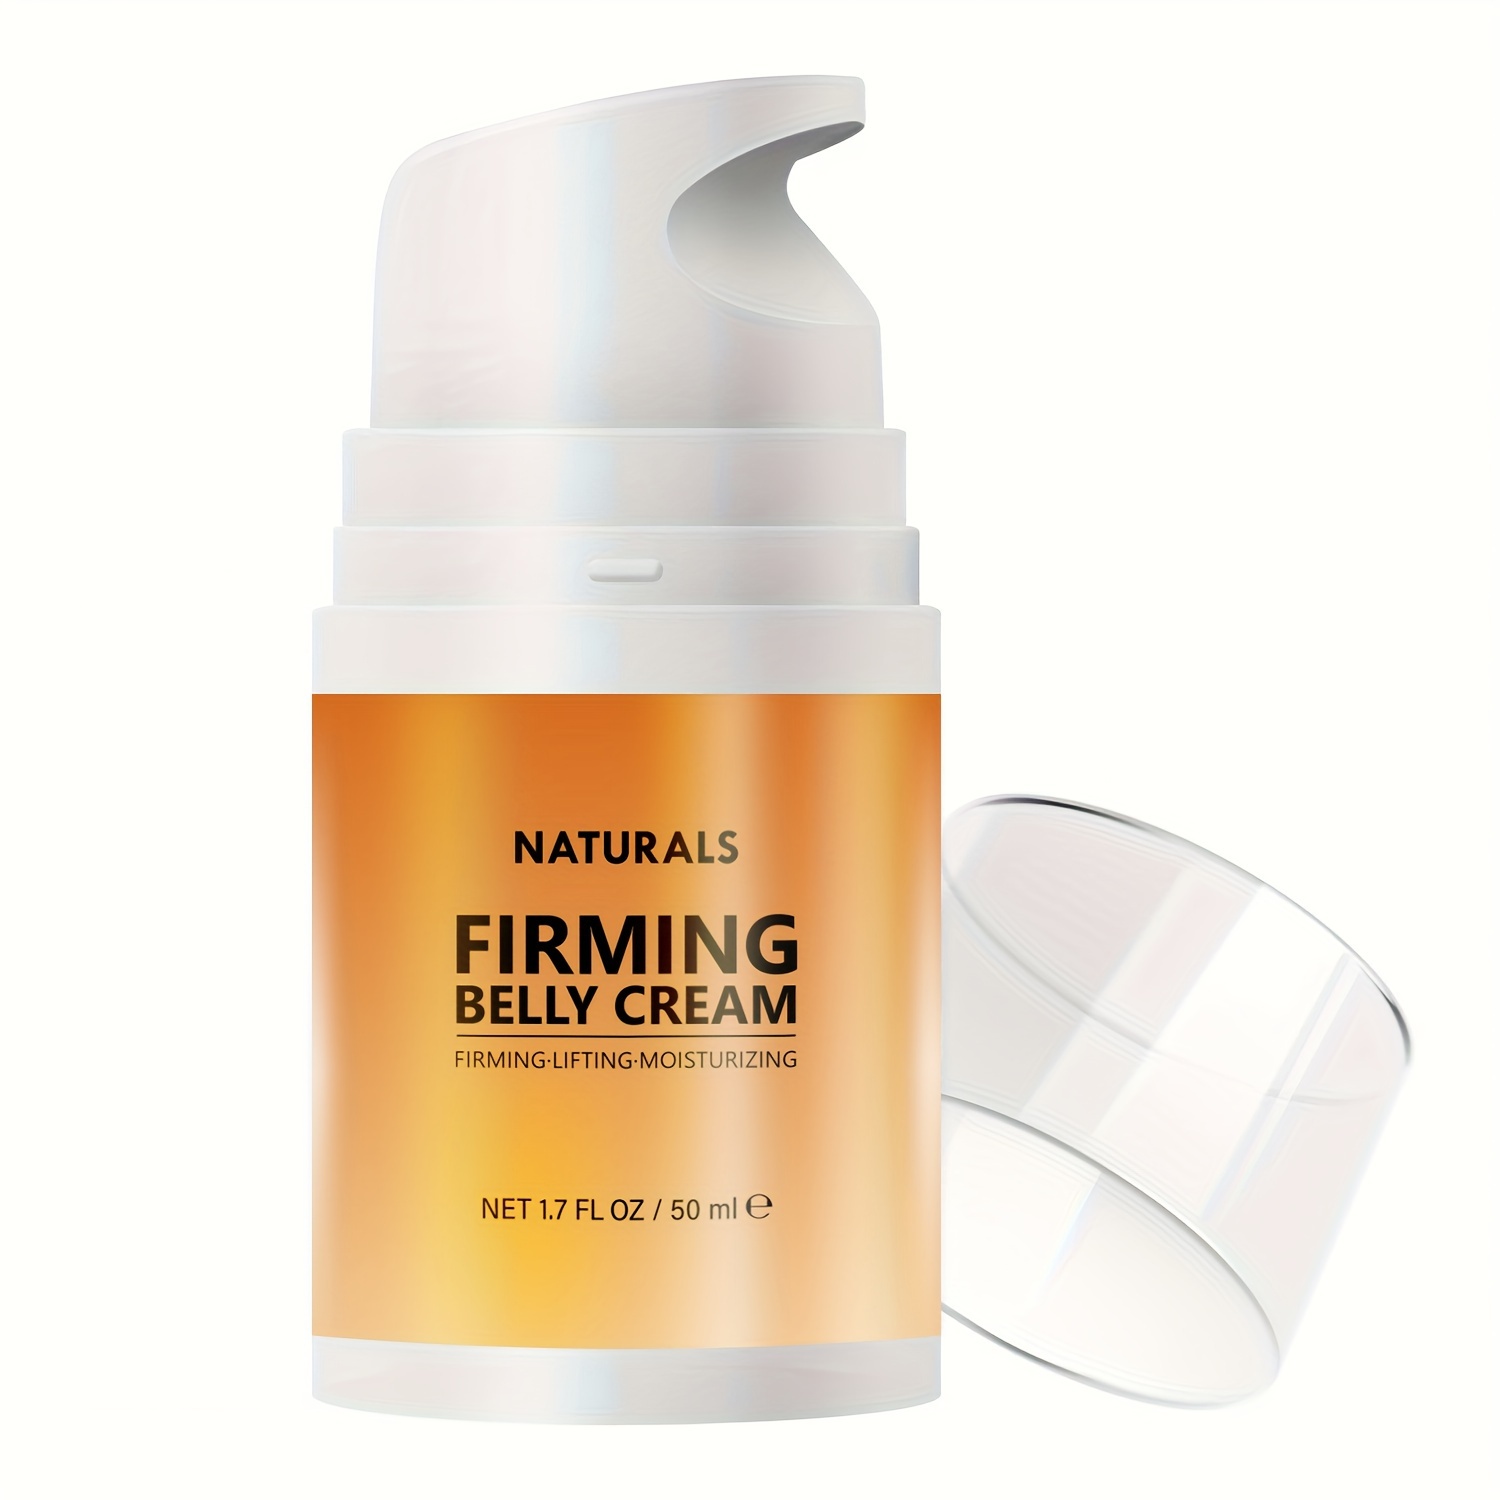 

50ml Firming Belly Cream For Skin Tightening, Firming Cream For Thighs & Butt - Moisturizing Lifting Body Lotion For Women And Men -- Net 1.7 Fl Oz / 50 Ml